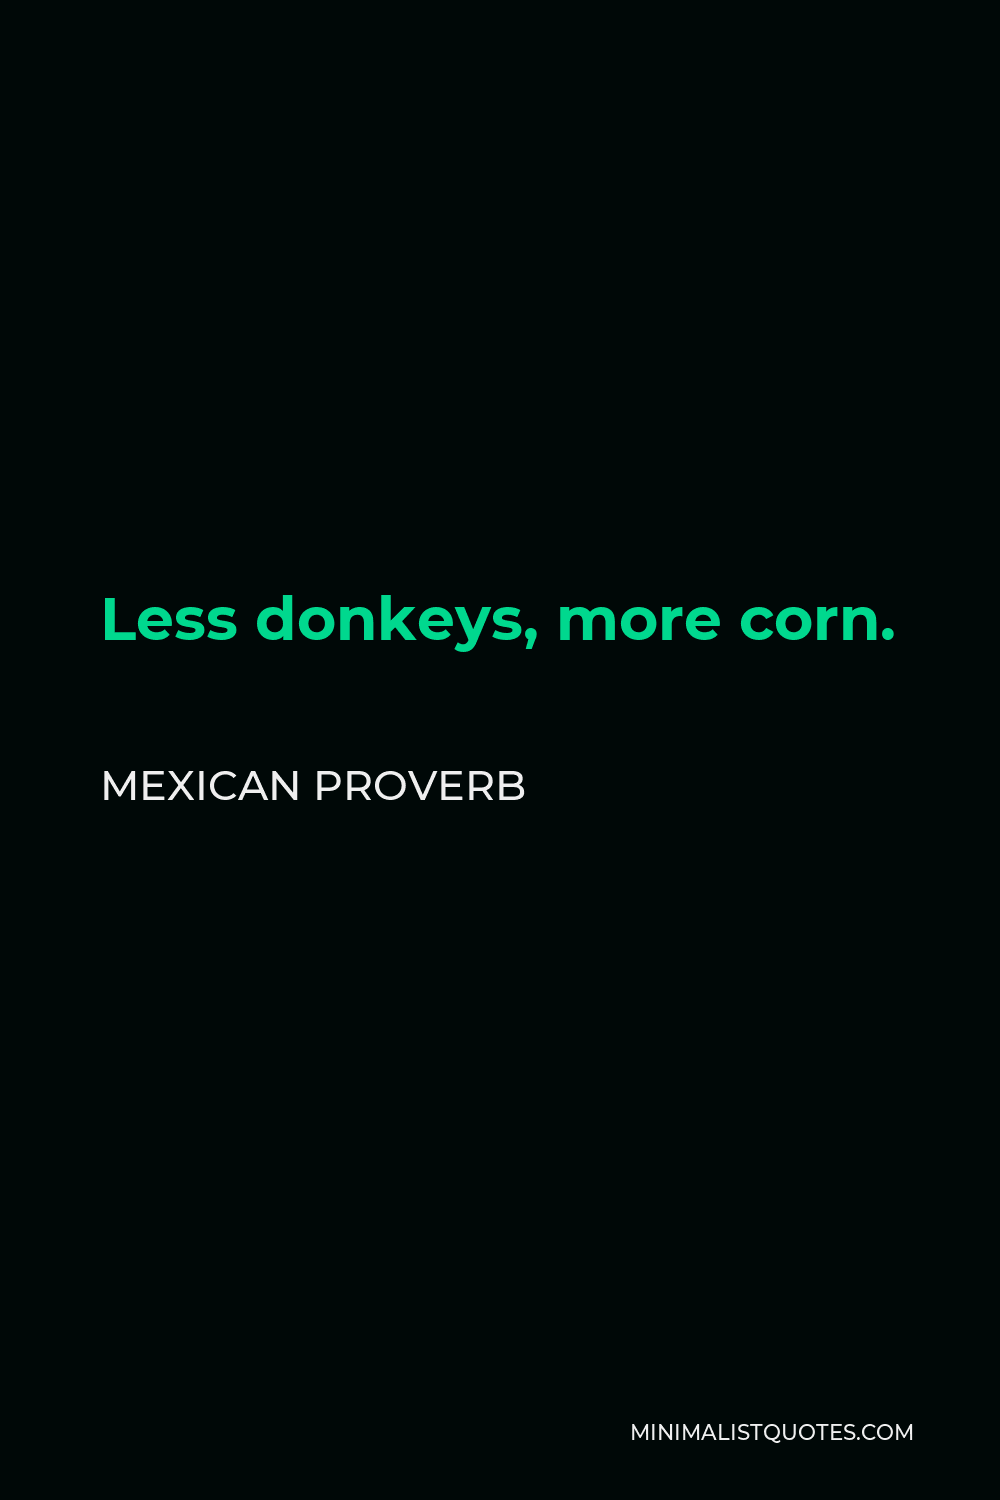 Mexican Proverb Quote - Less donkeys, more corn.